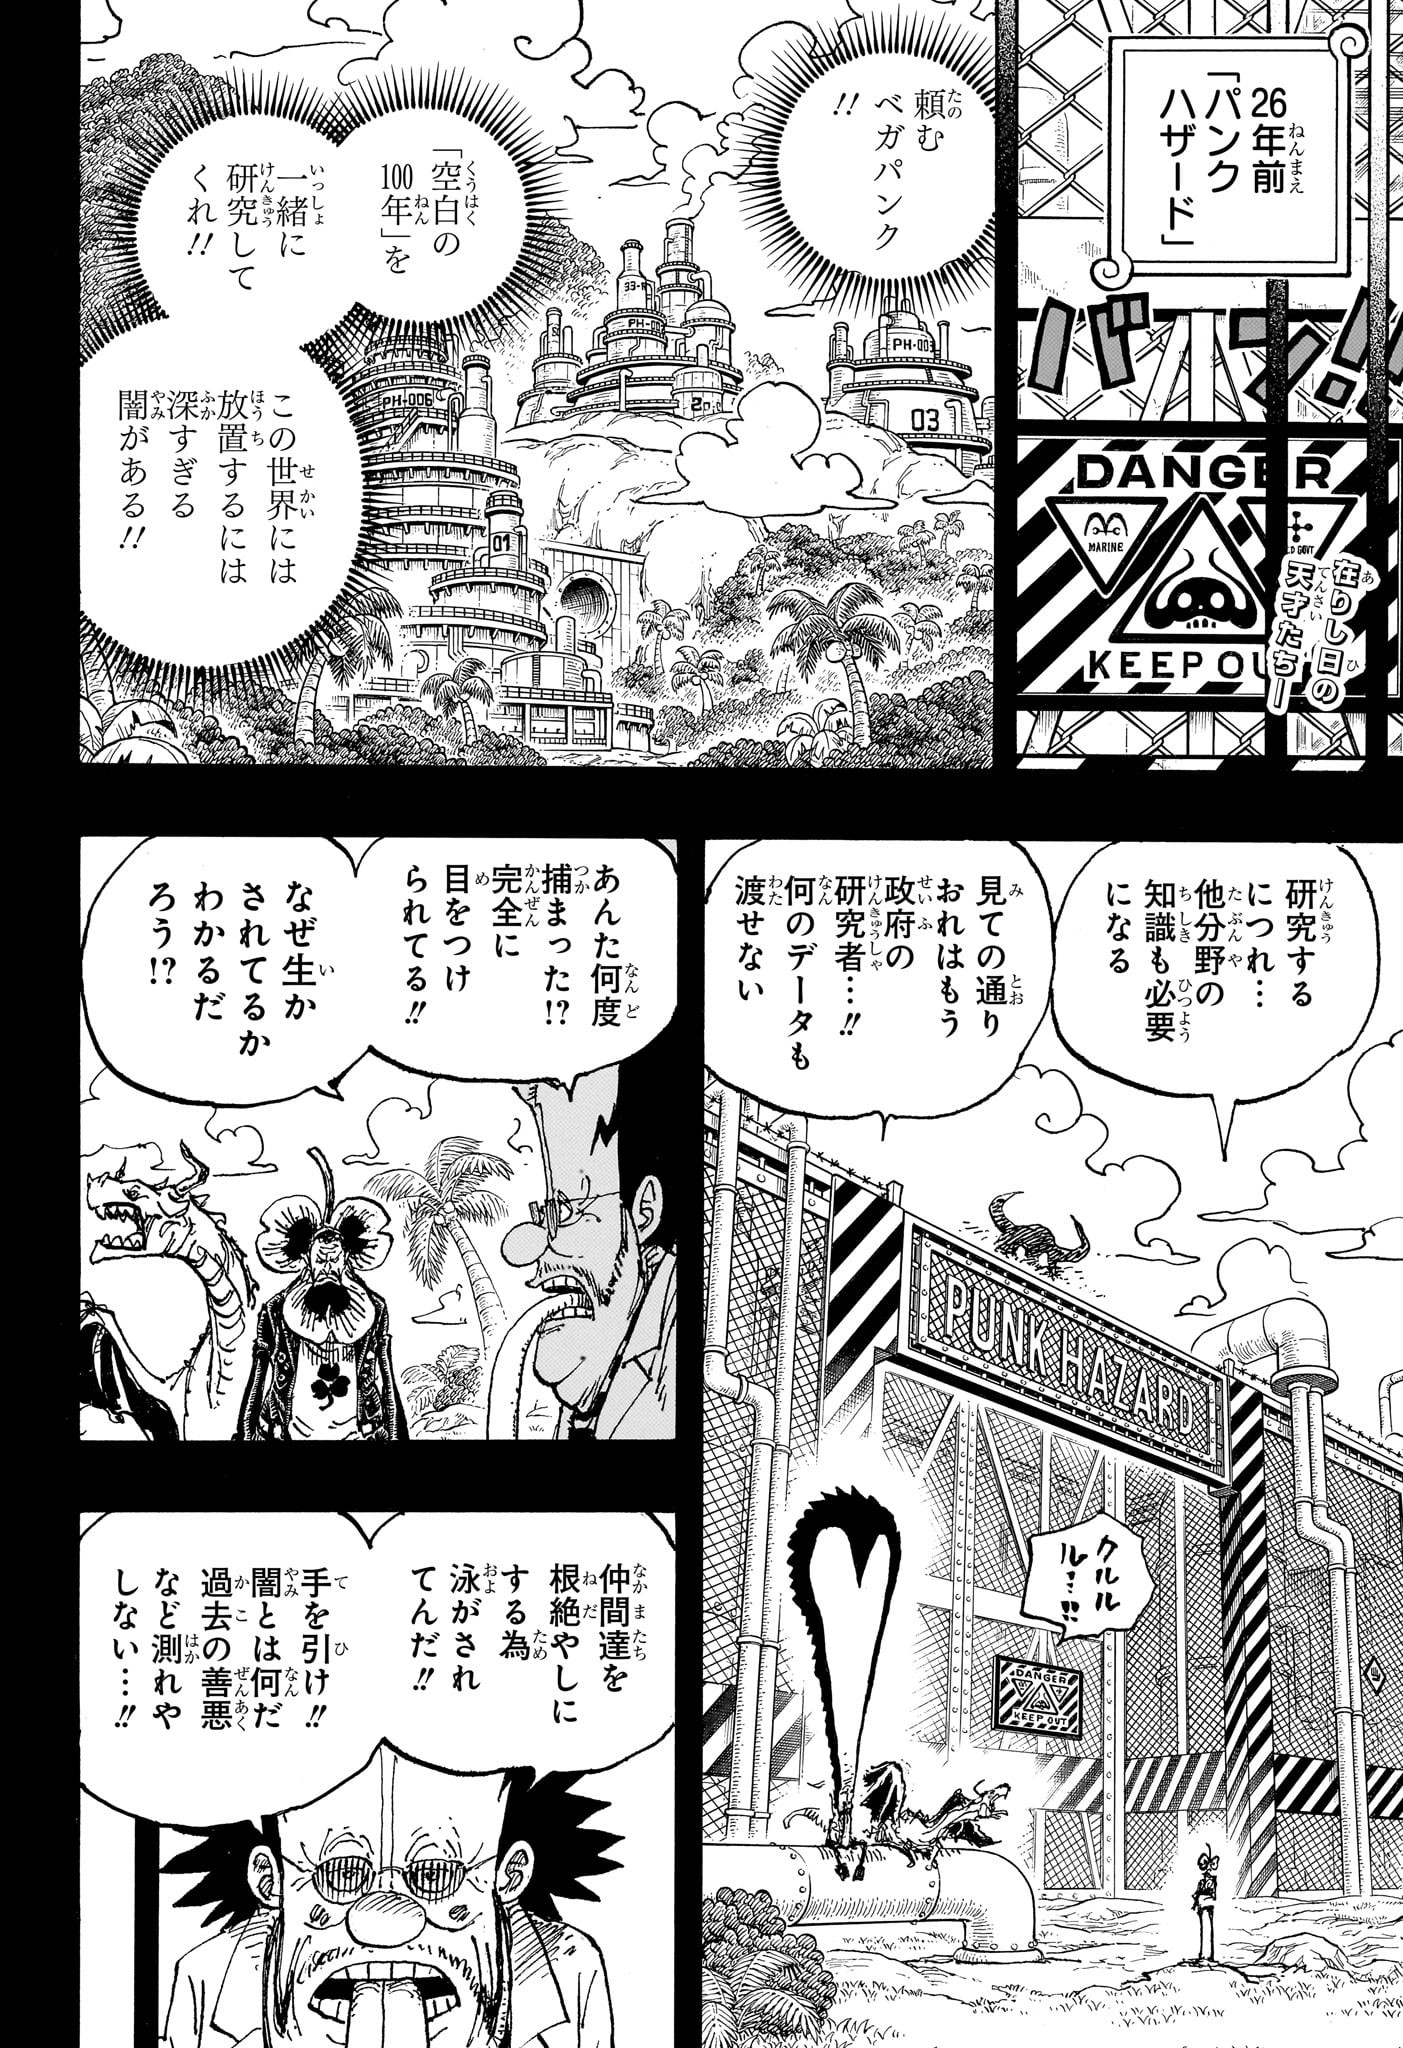 One Piece - Chapter 1120 - Page 2